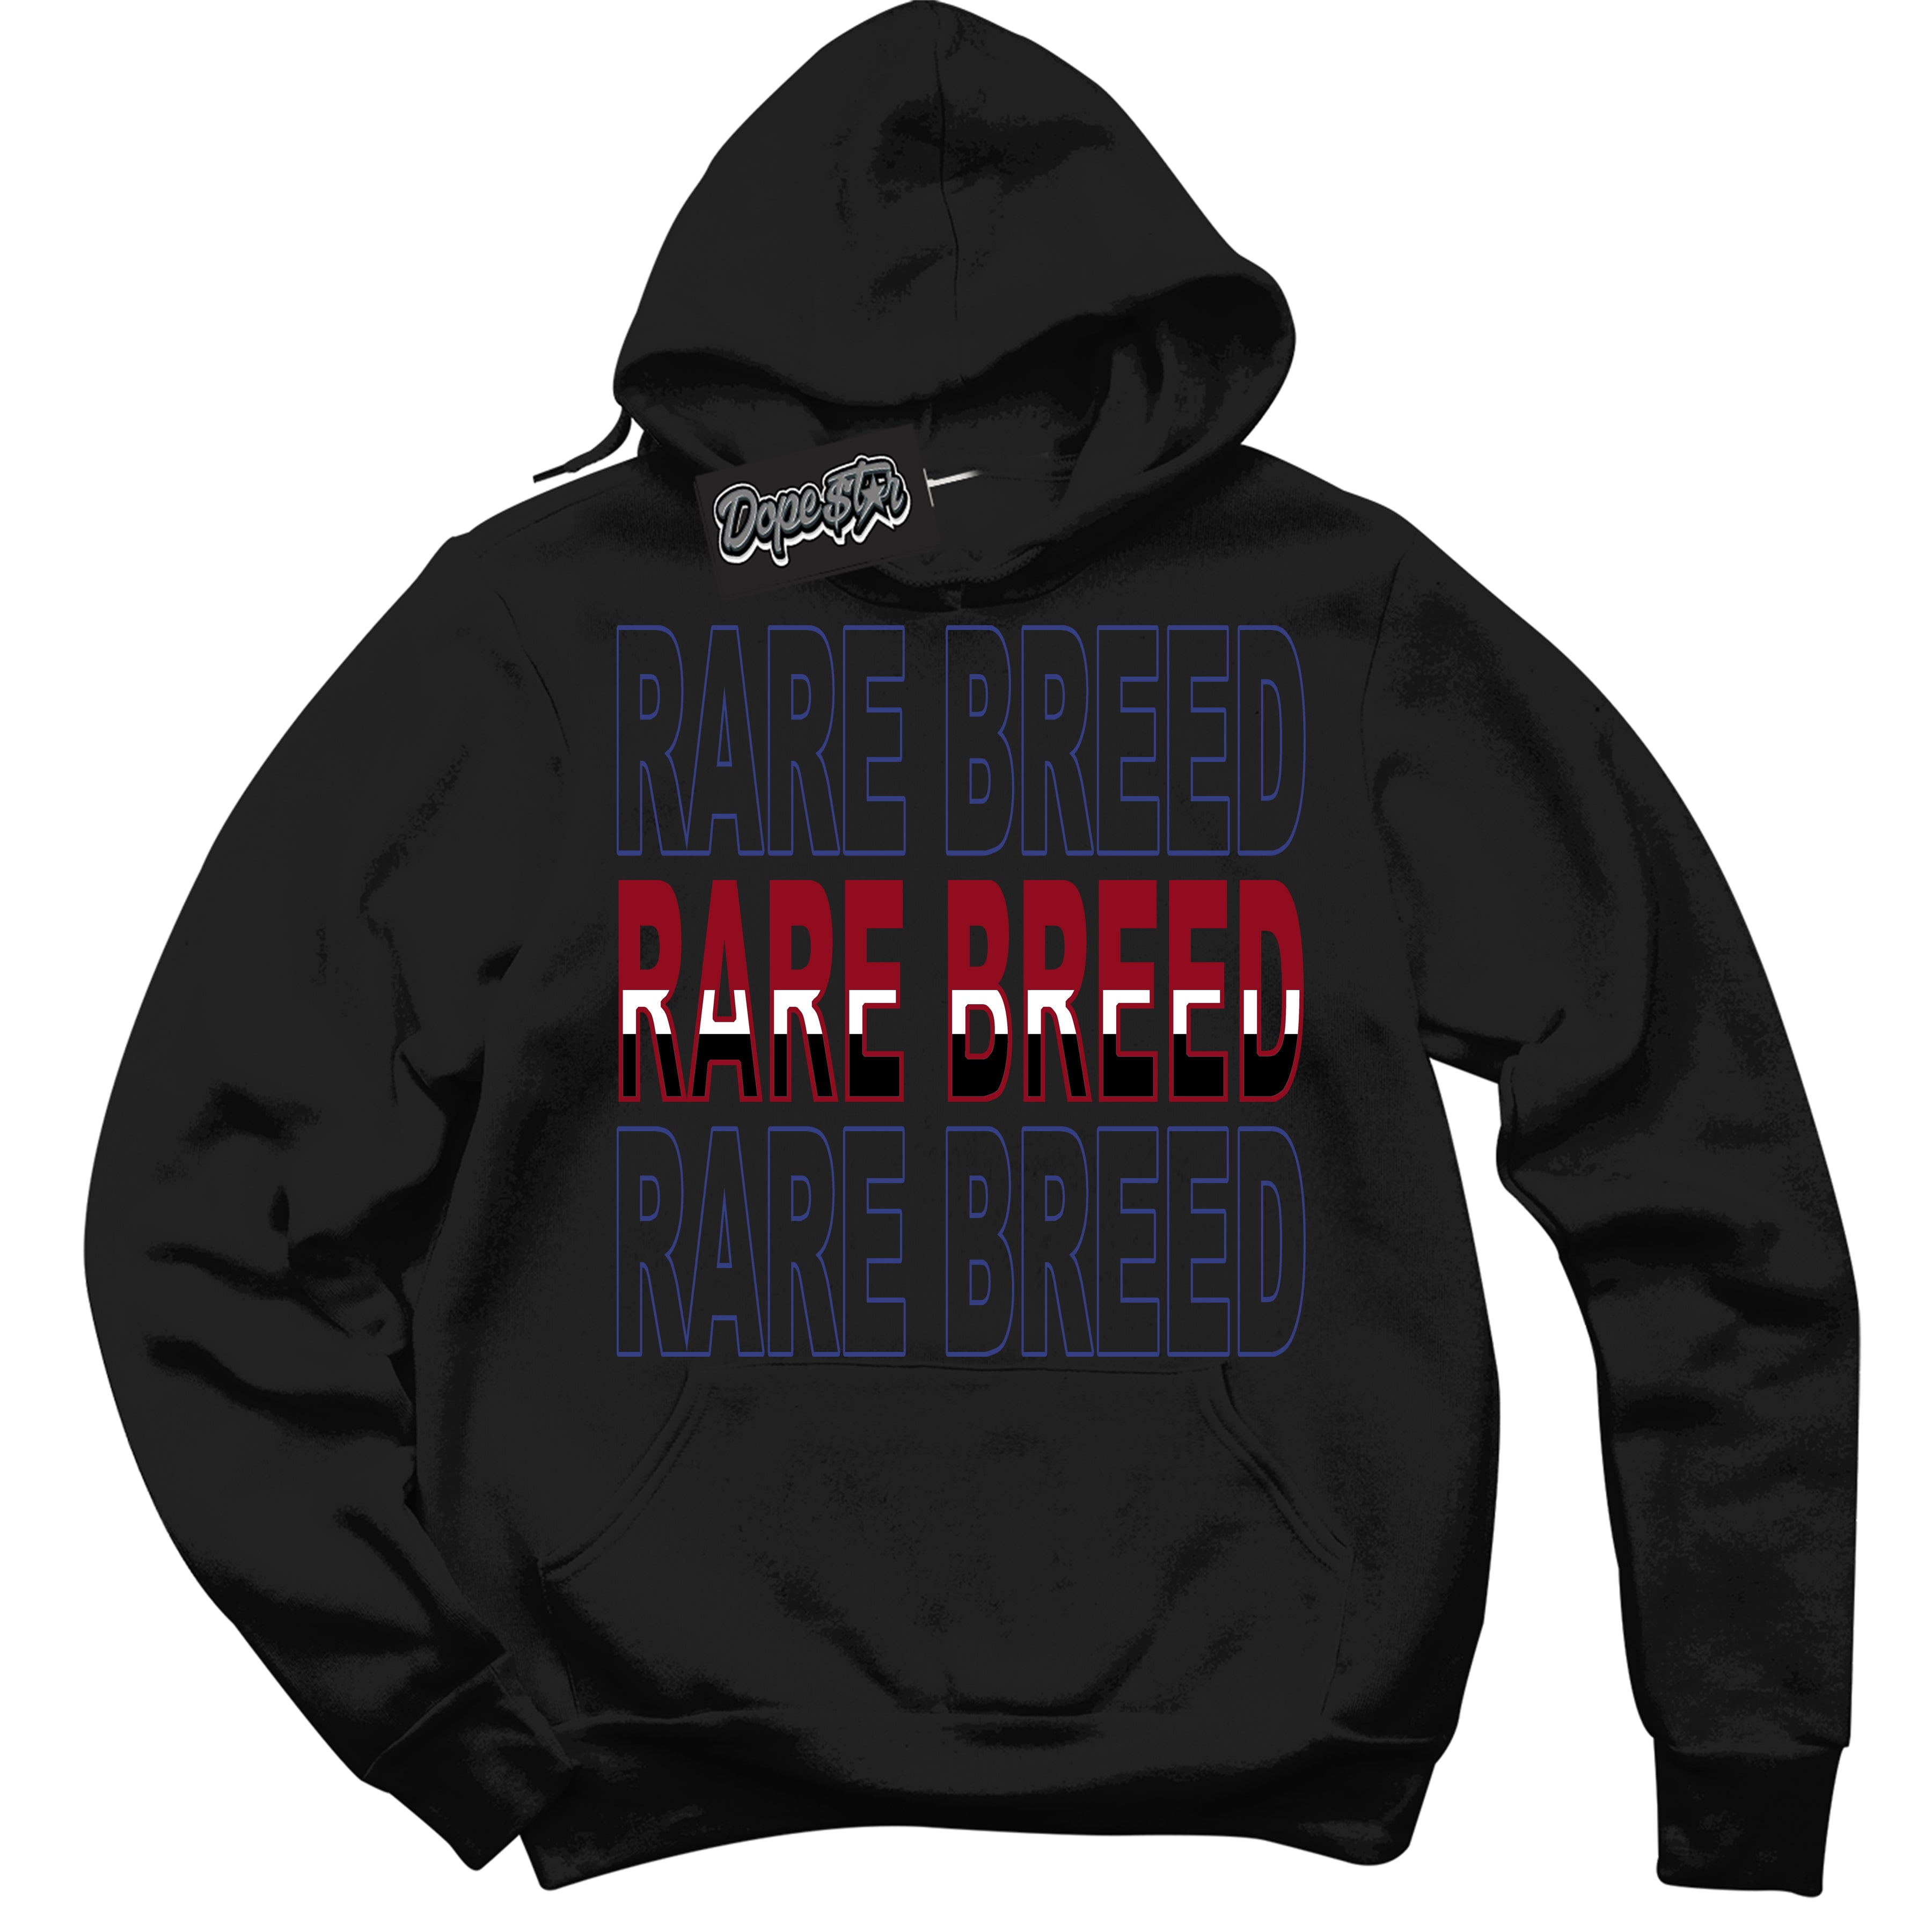 Cool Black Hoodie with “ Rare Breed ”  design that Perfectly Matches Playoffs 8s Sneakers.